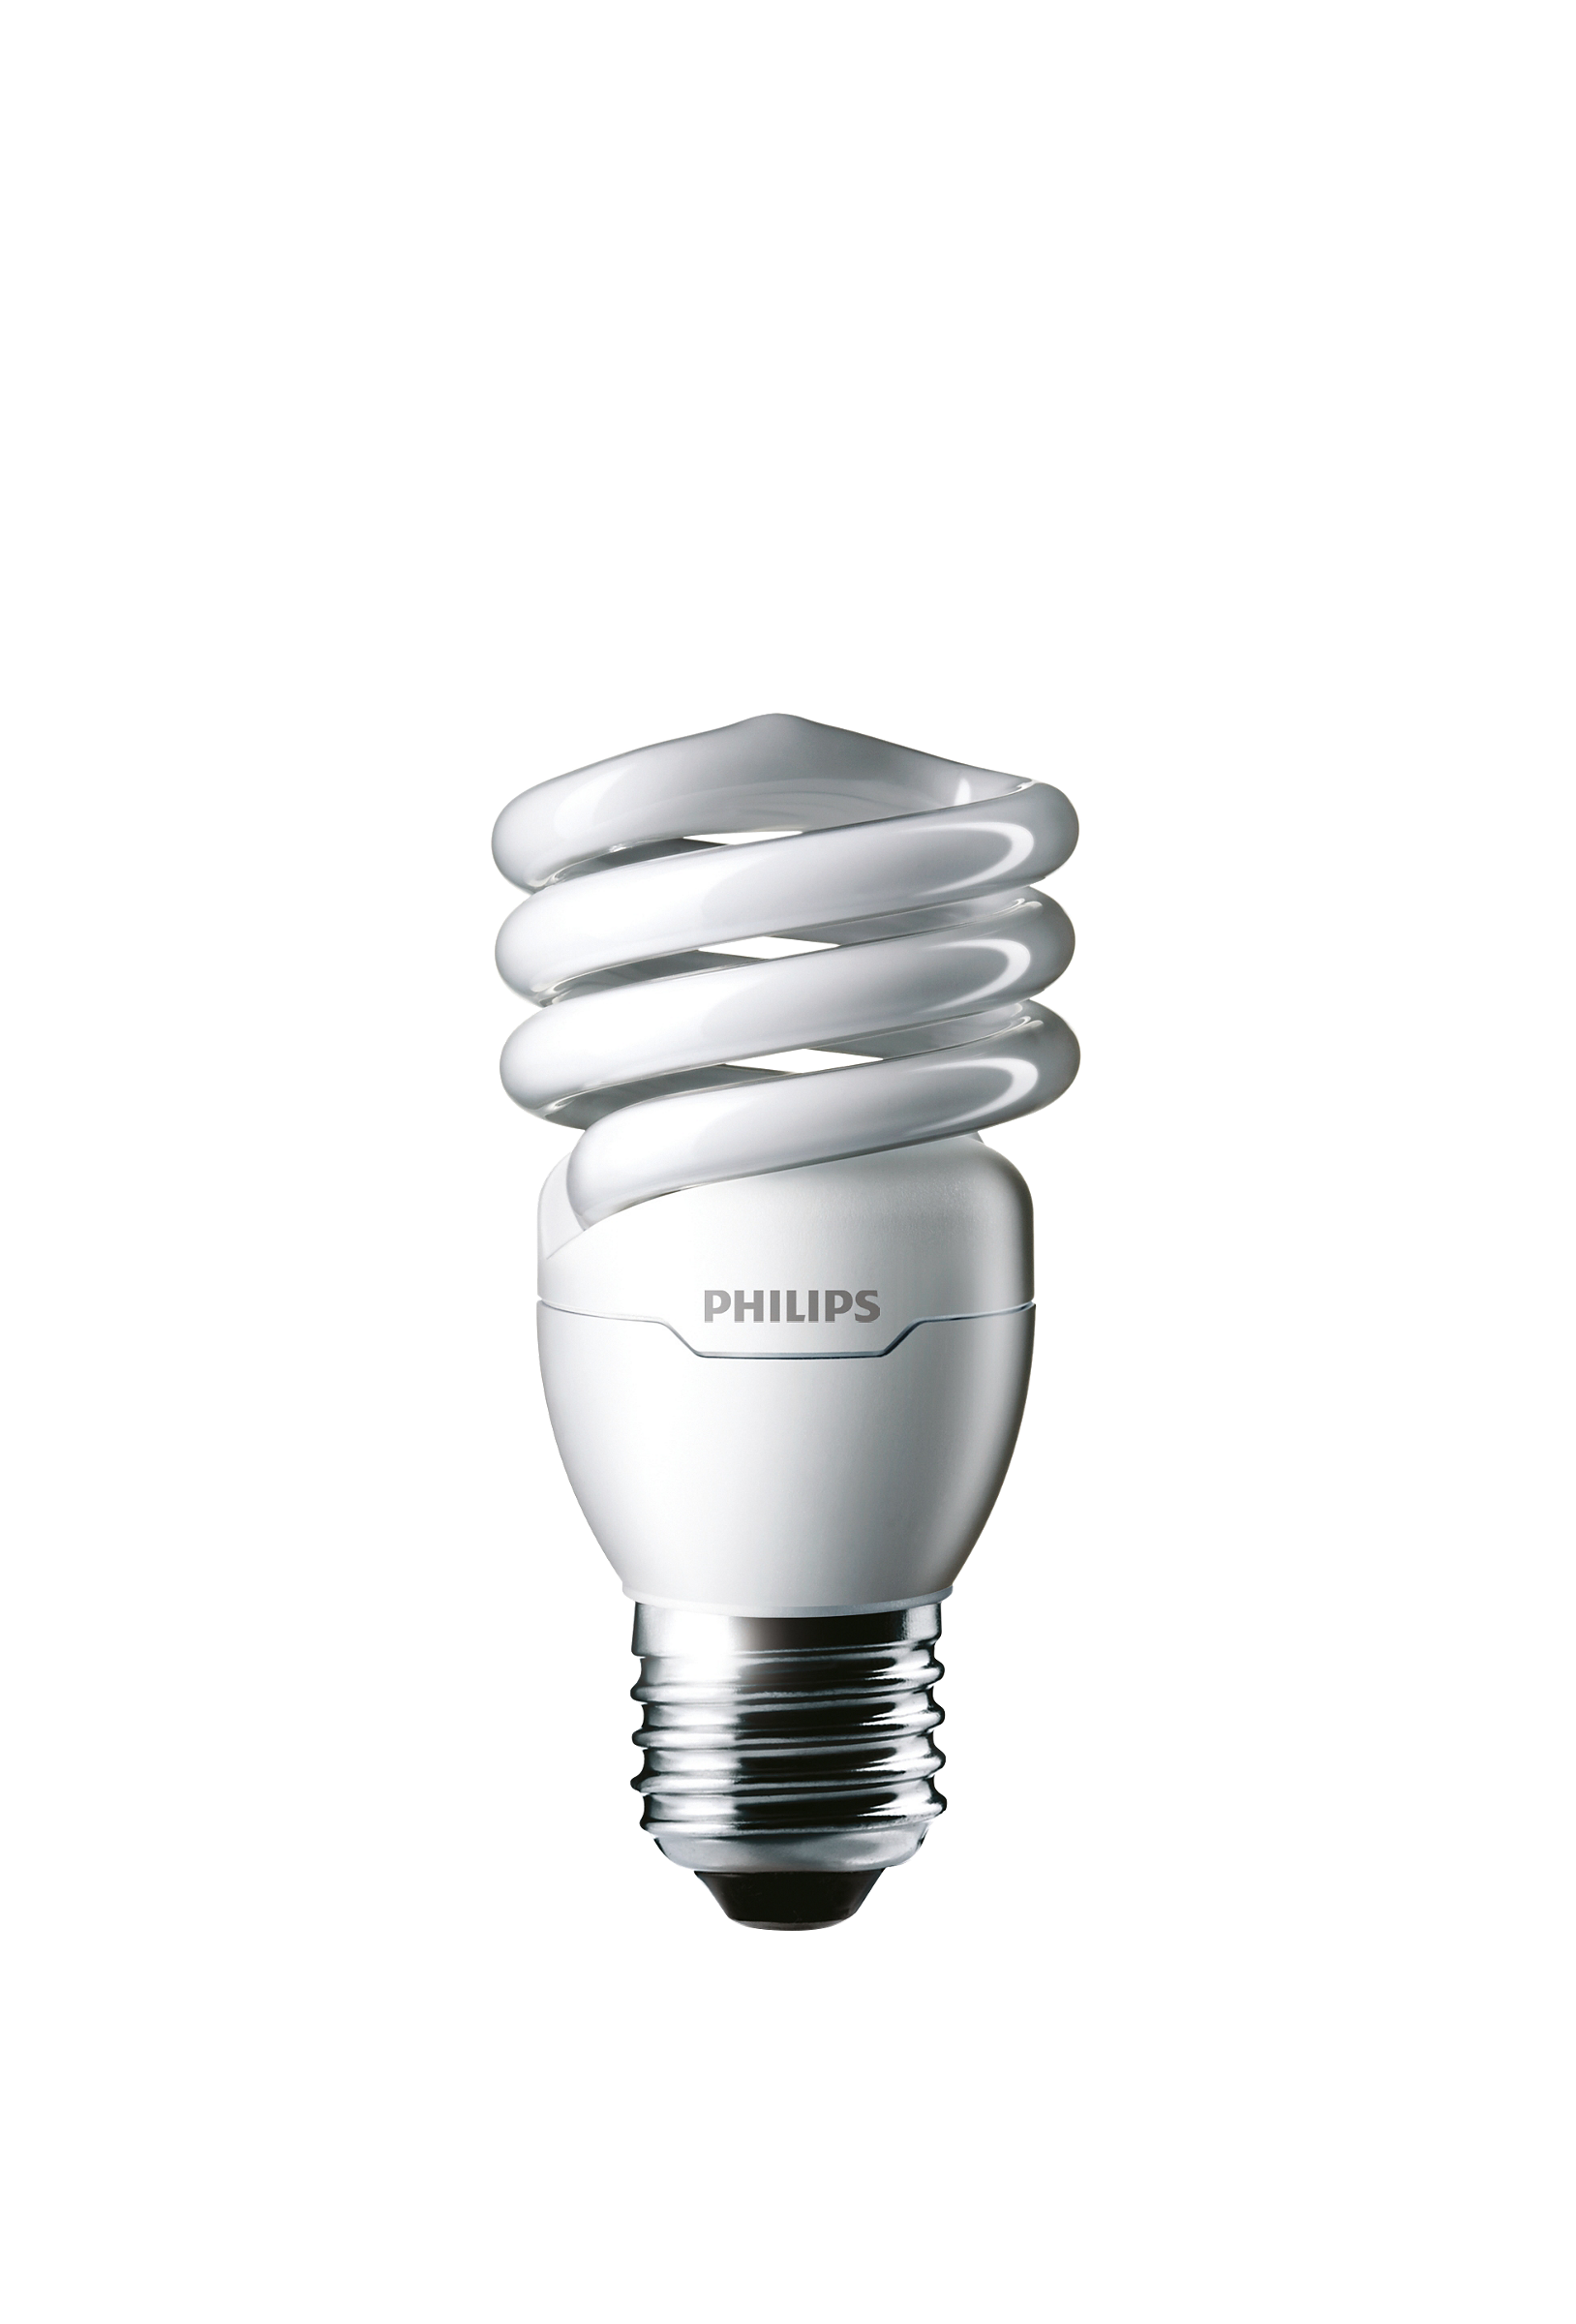 Philips LED 417089 Energy Saver Compact Fluorescent T2 Twister 4 PACK 